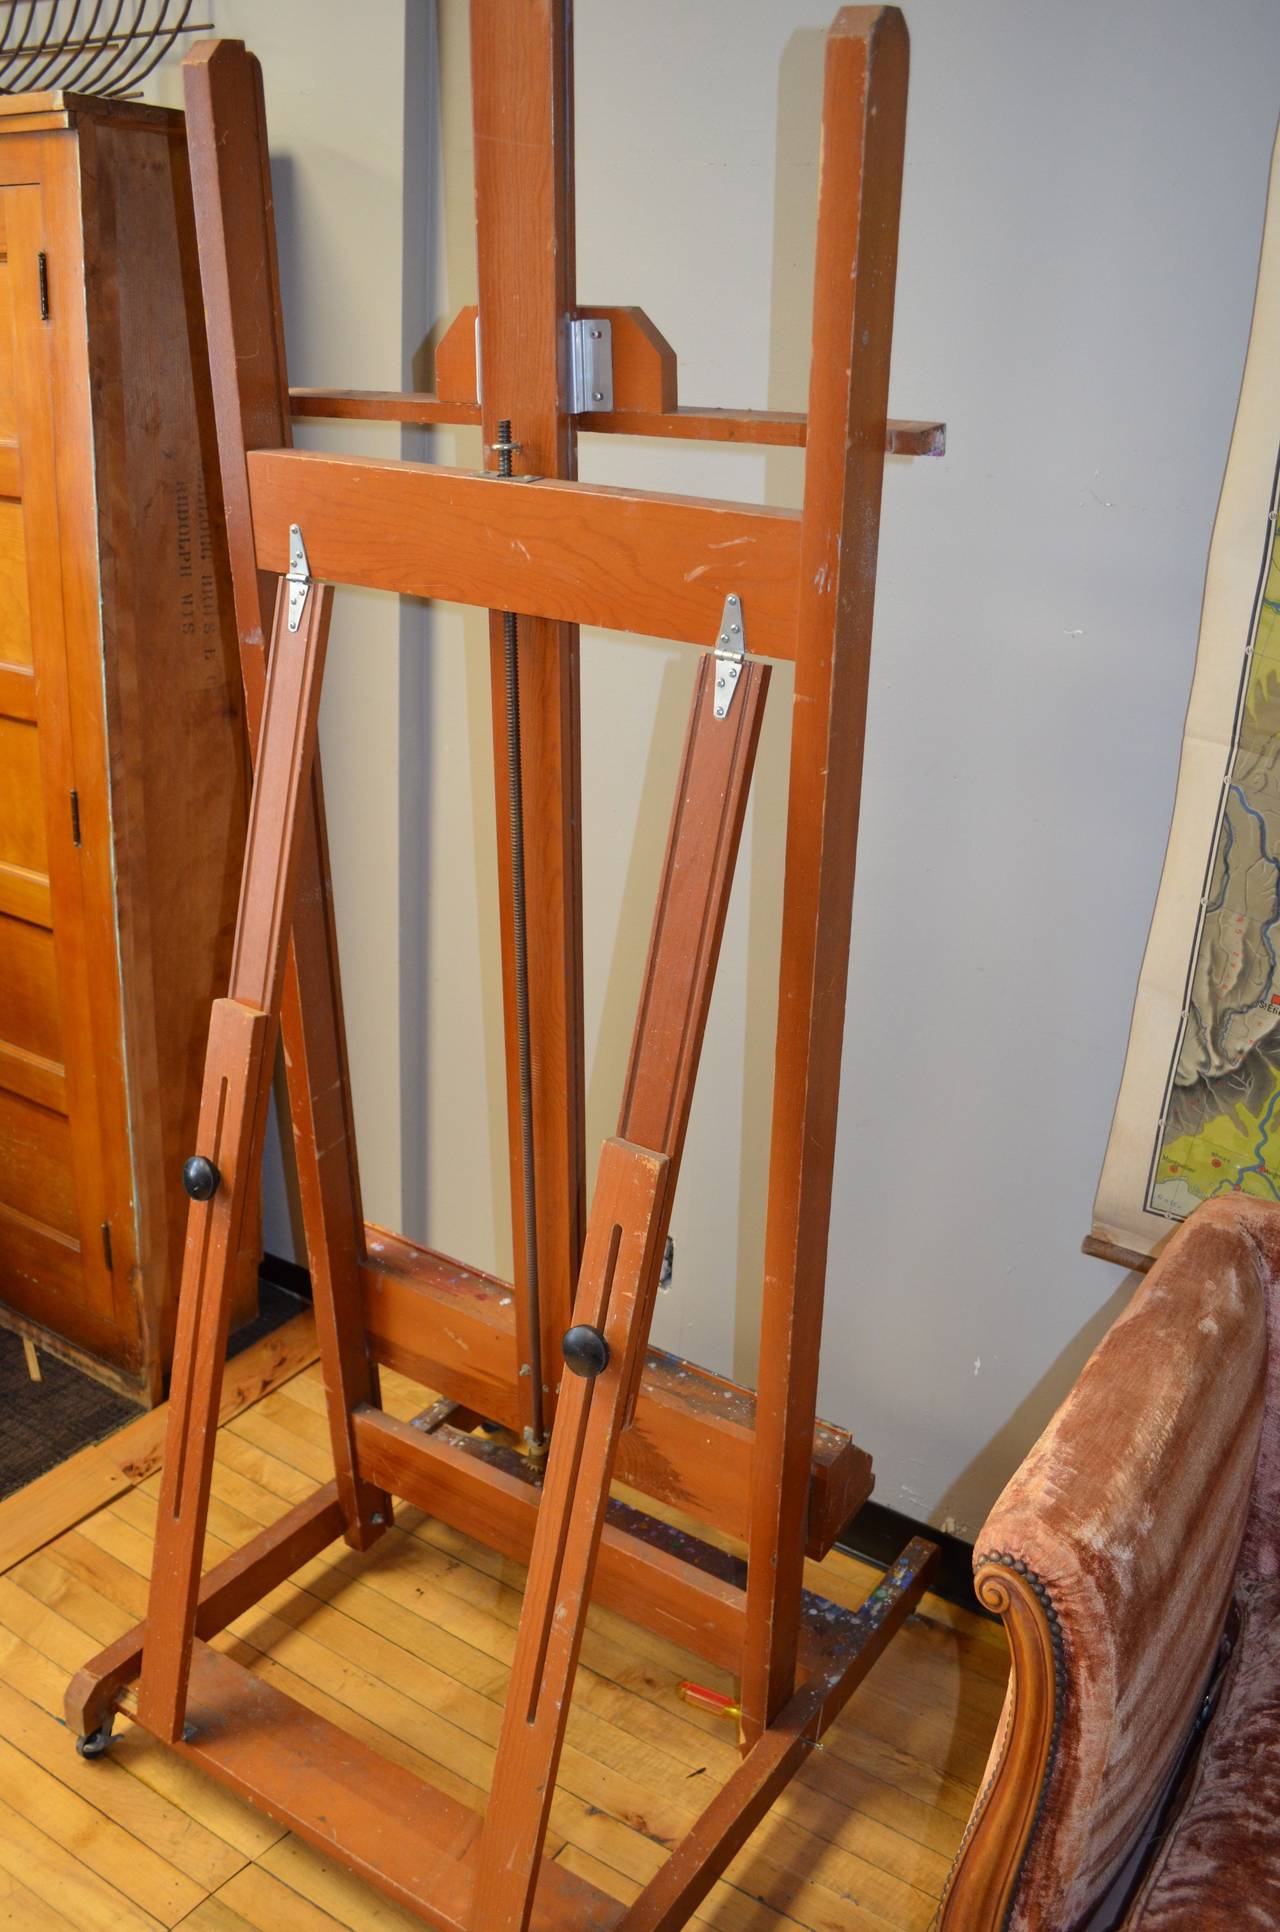 Wood Artist's Easel in H-style, Ideal for Displaying Flatscreen TV